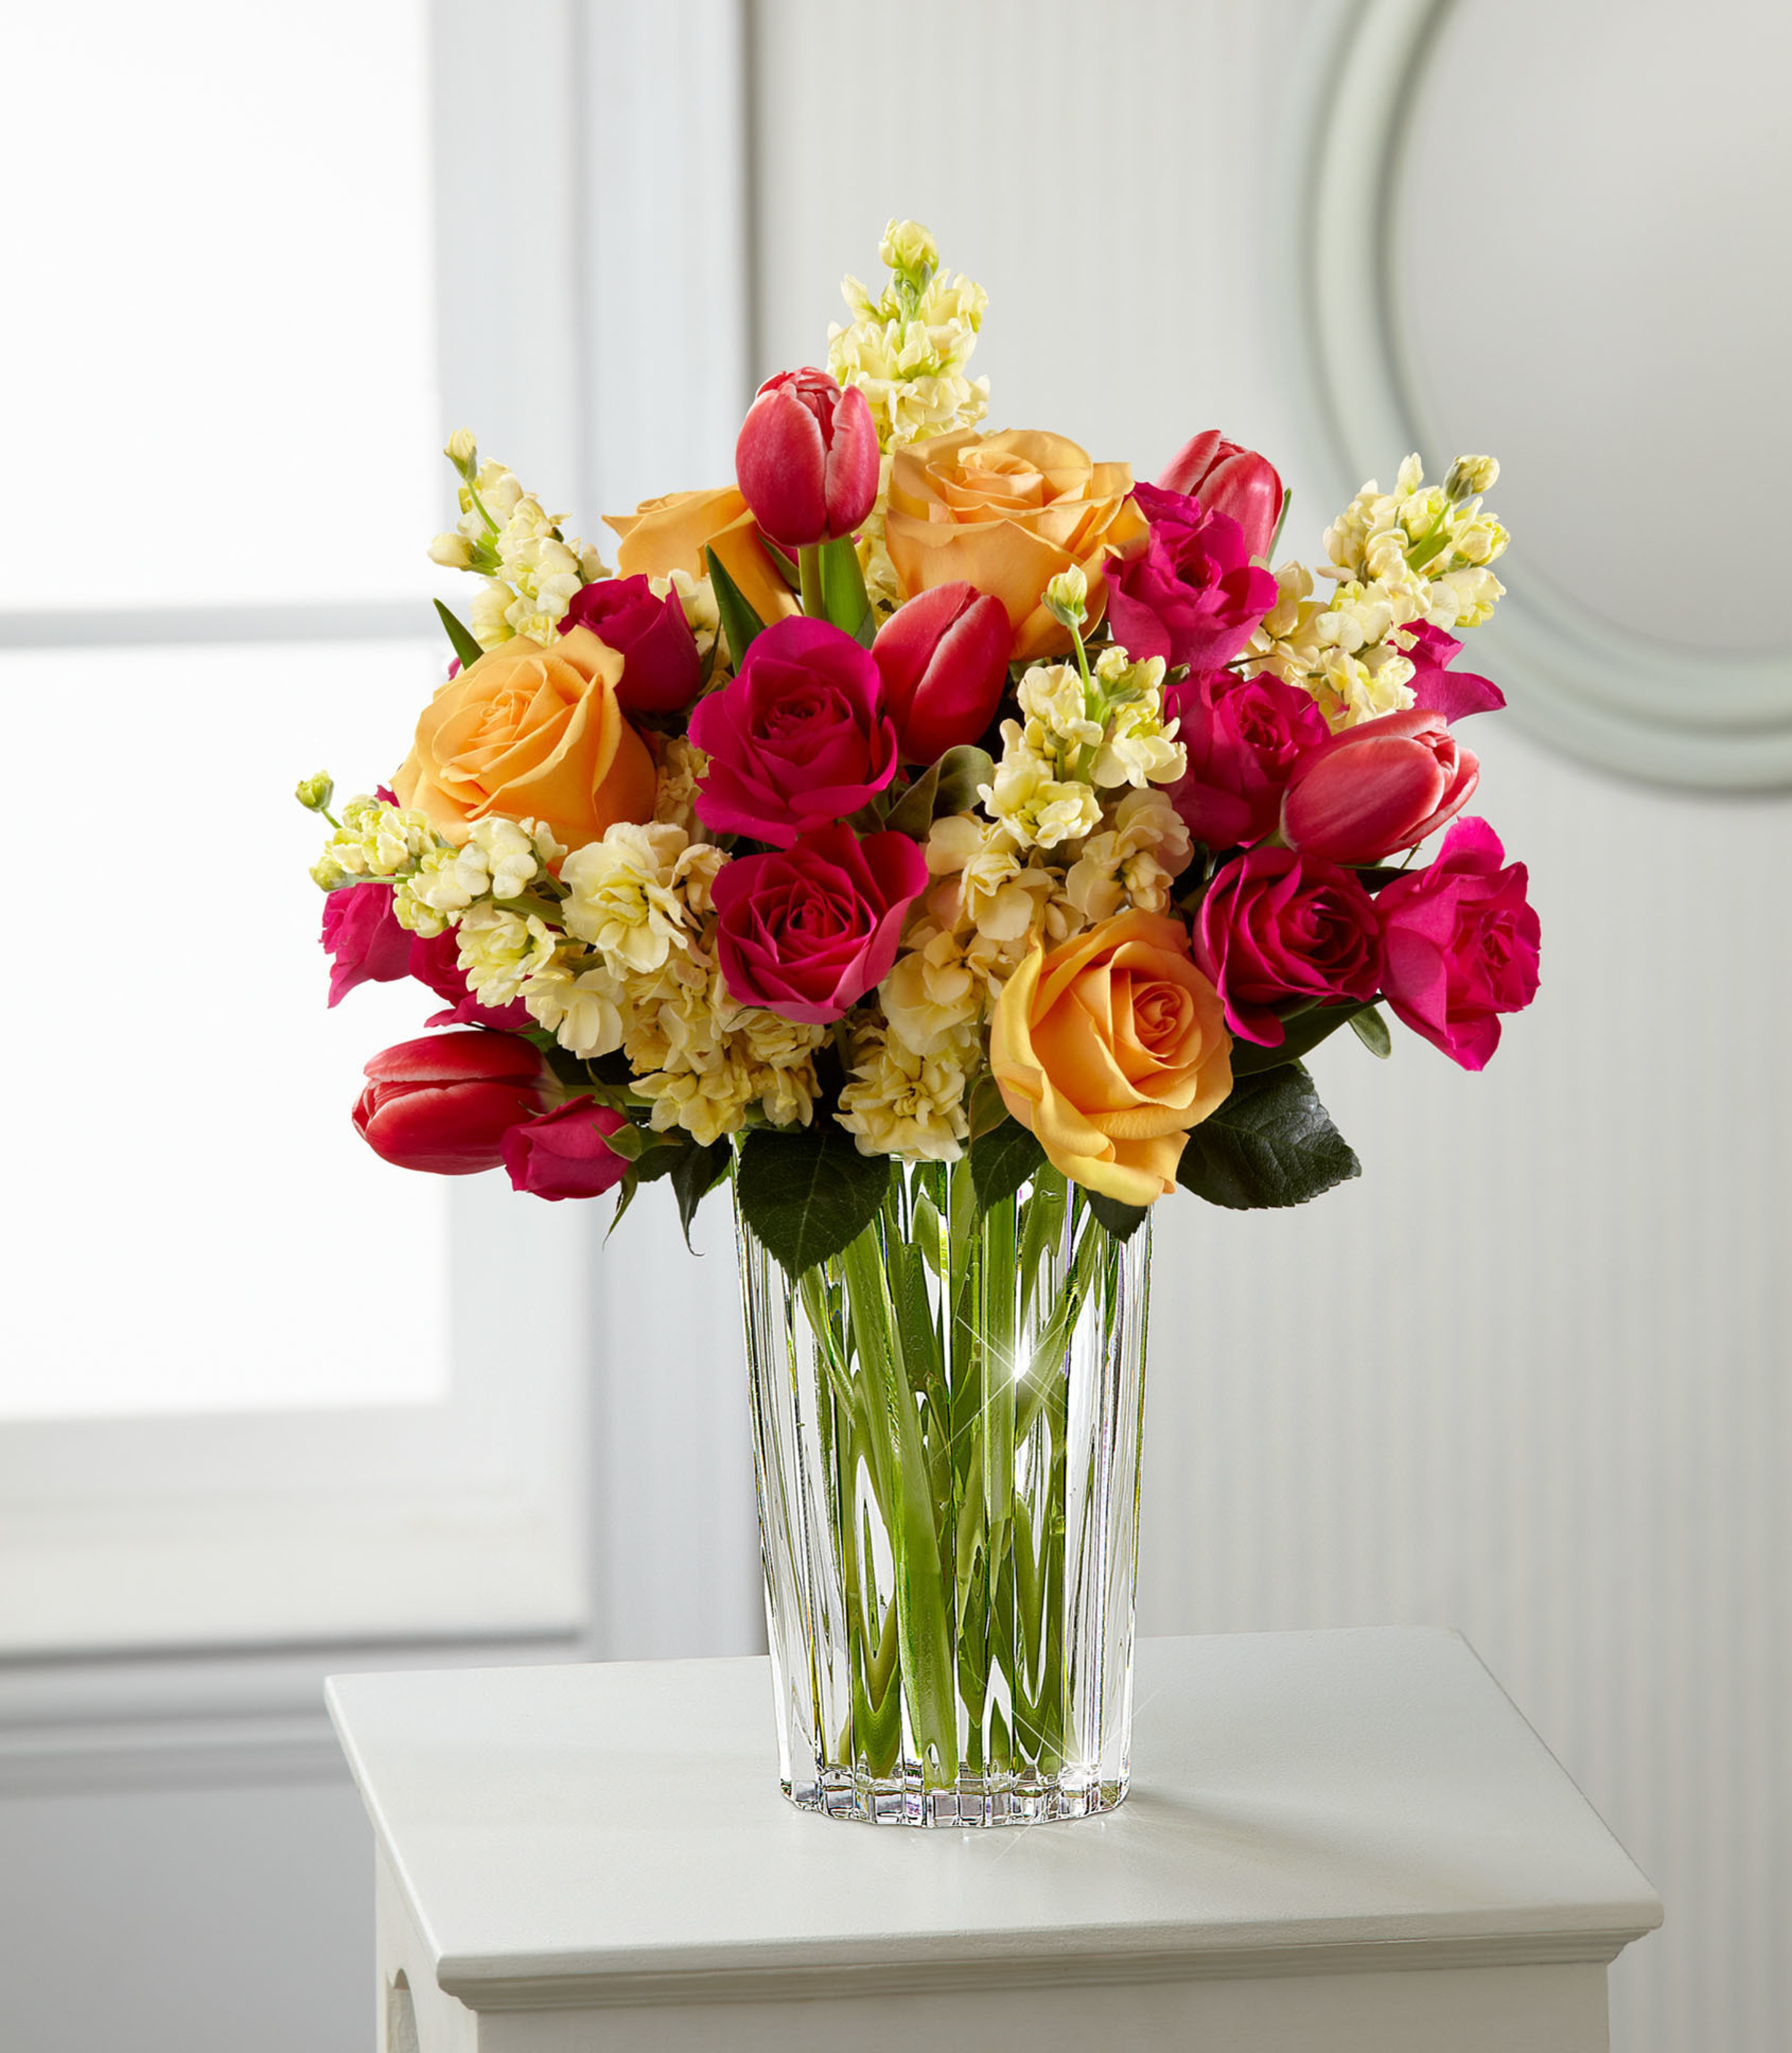 FTD's floral design expert forecasts bright oranges and pinks will be popular this Mother’s Day. The FTD Beauty and Grace Bouquet by Vera Wang showcases this trend and will bring a pop of color to the holiday.  (PRNewsFoto/FTD Companies, Inc.)